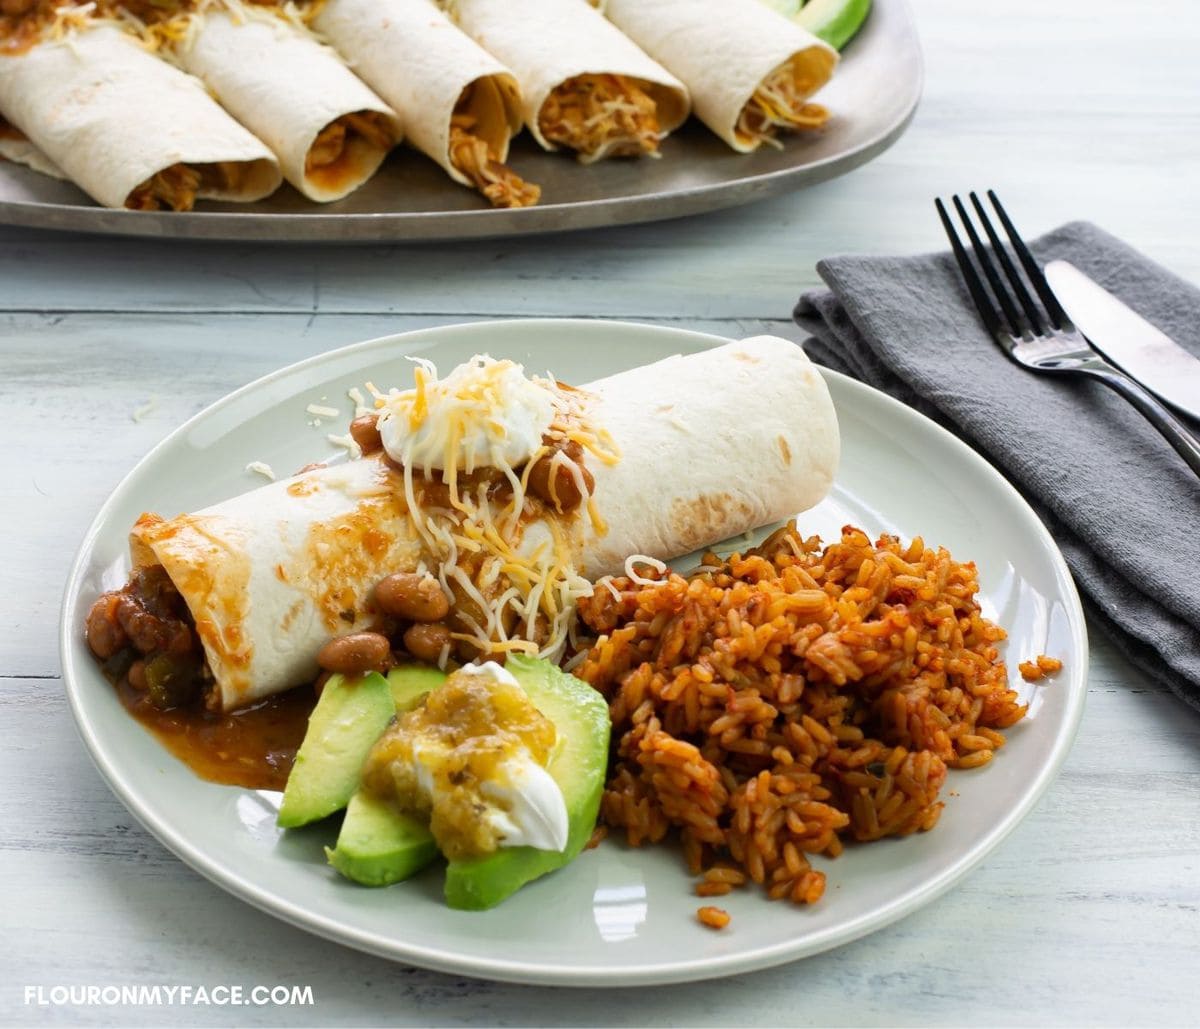 A dinner plate with chicken burritos, slice avocado and rice.